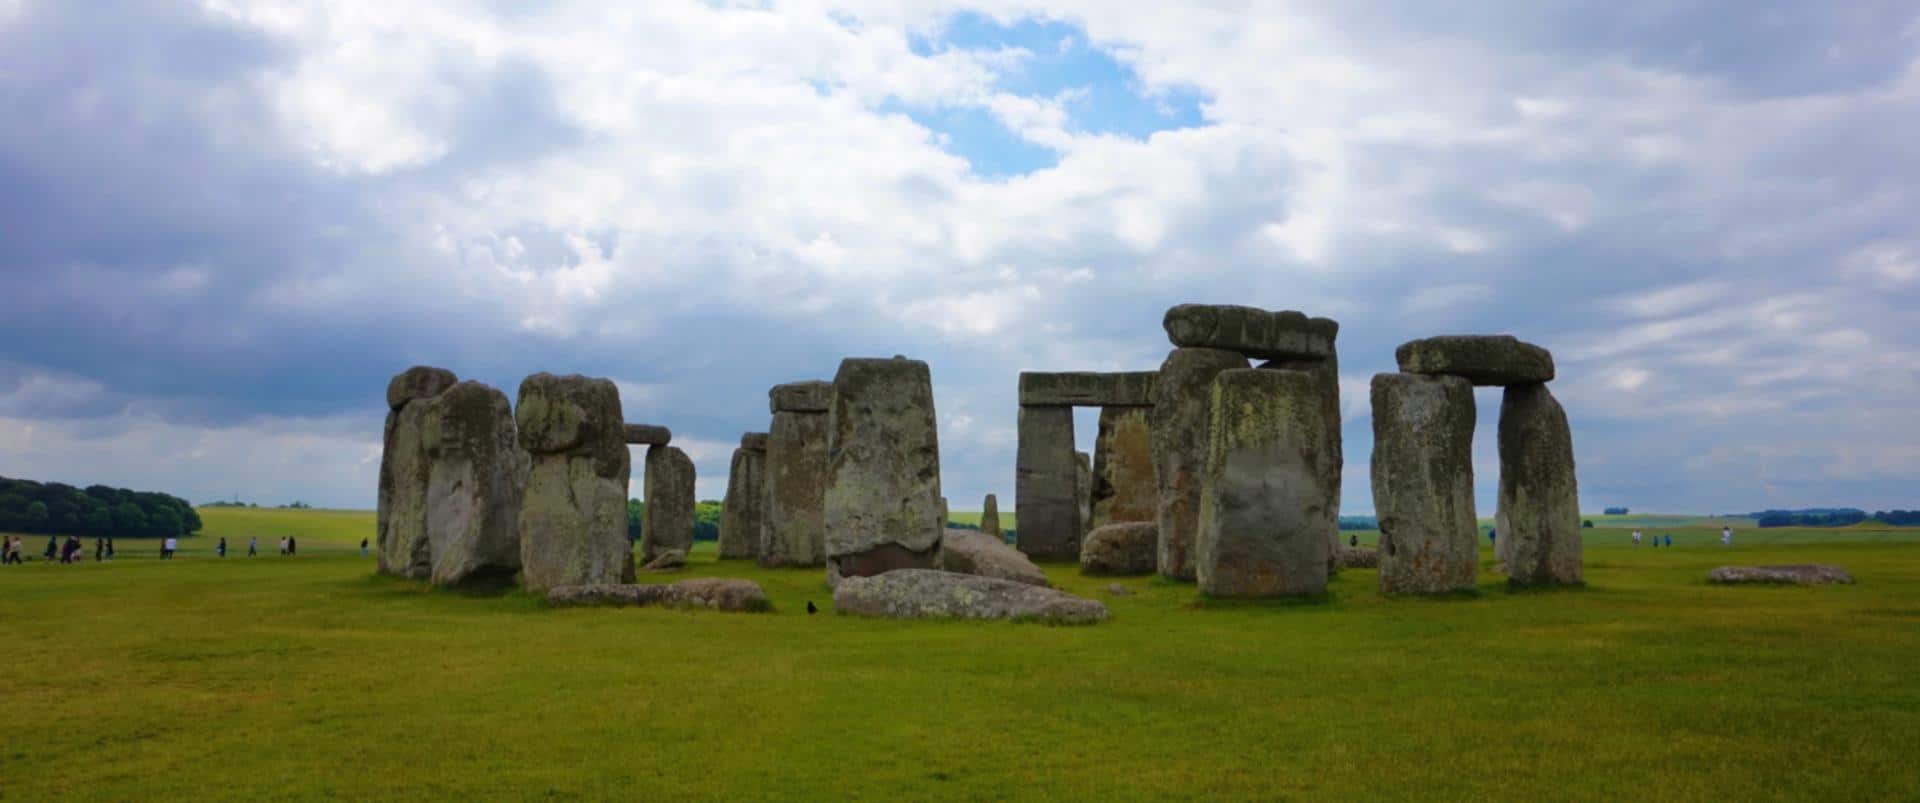 Day trip to Stonehenge and bath from London